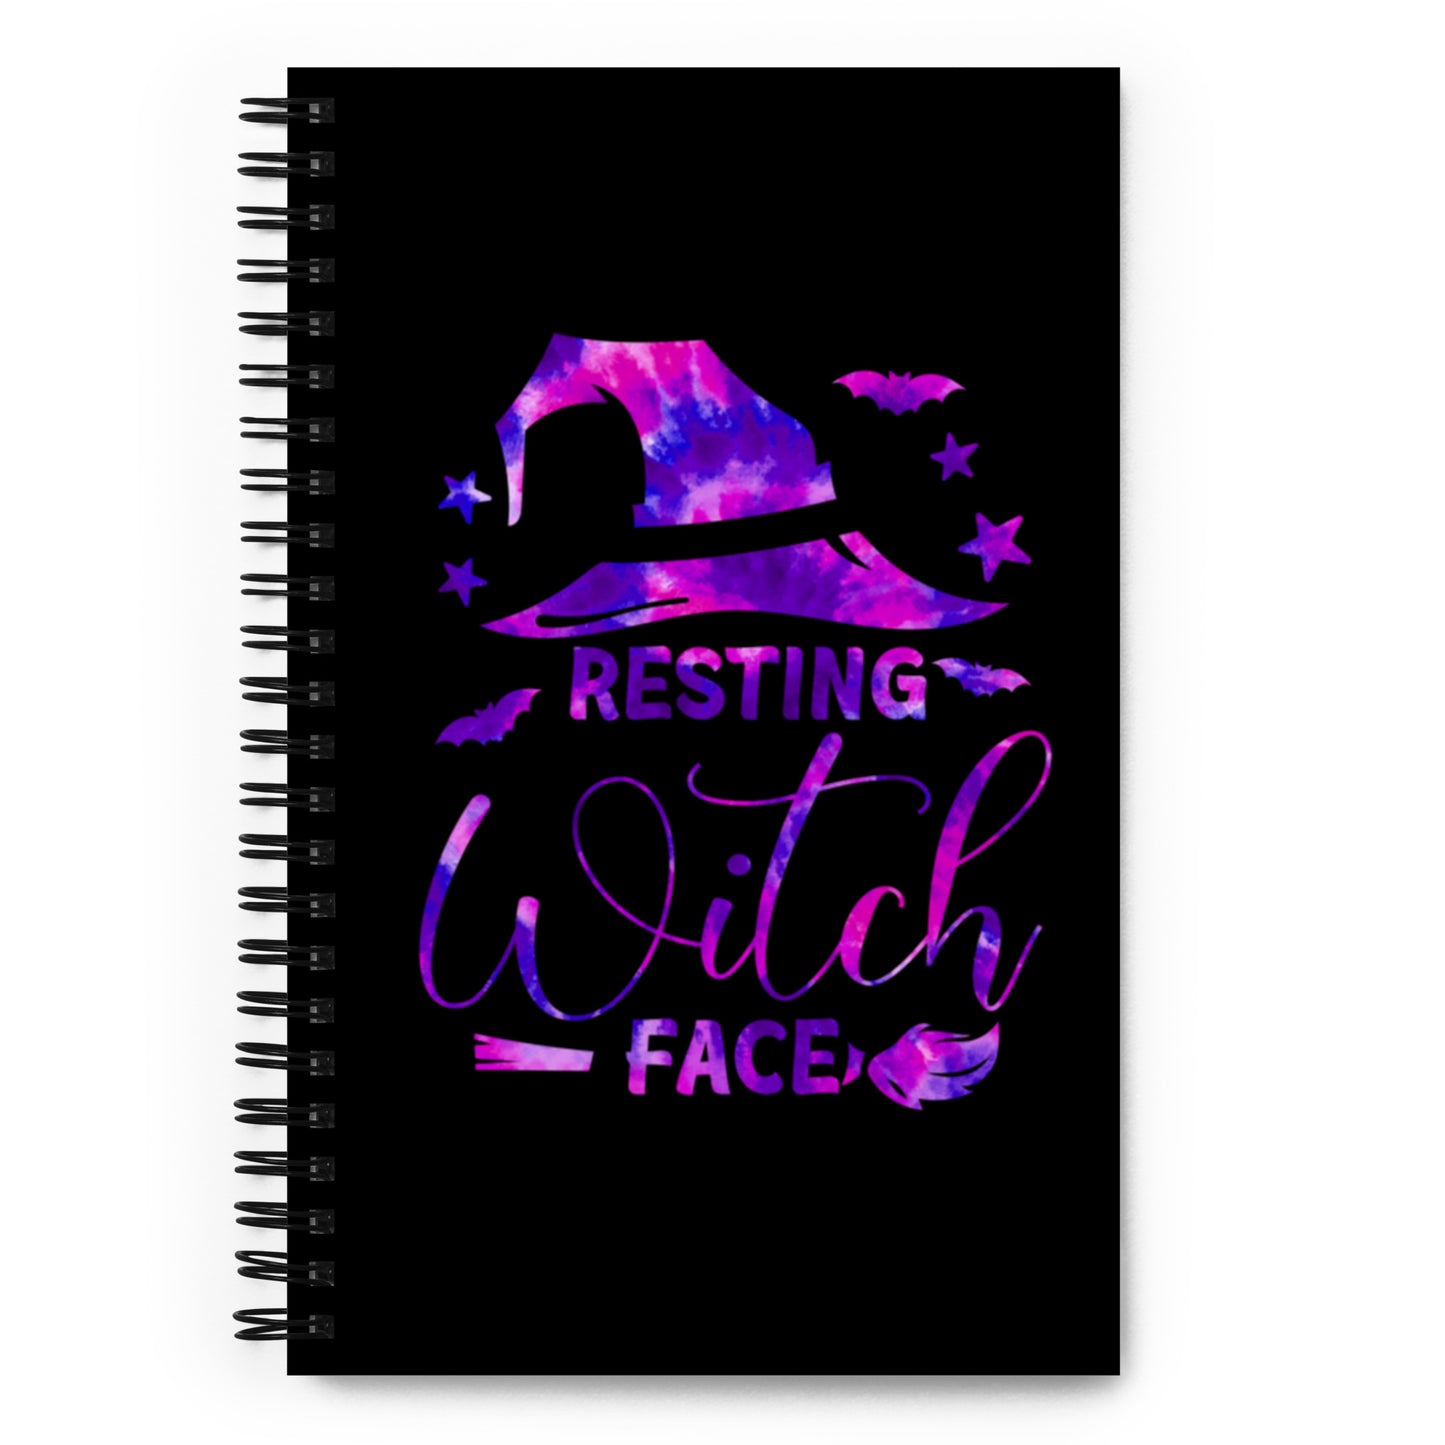 Resting Witch Face Spiral notebook